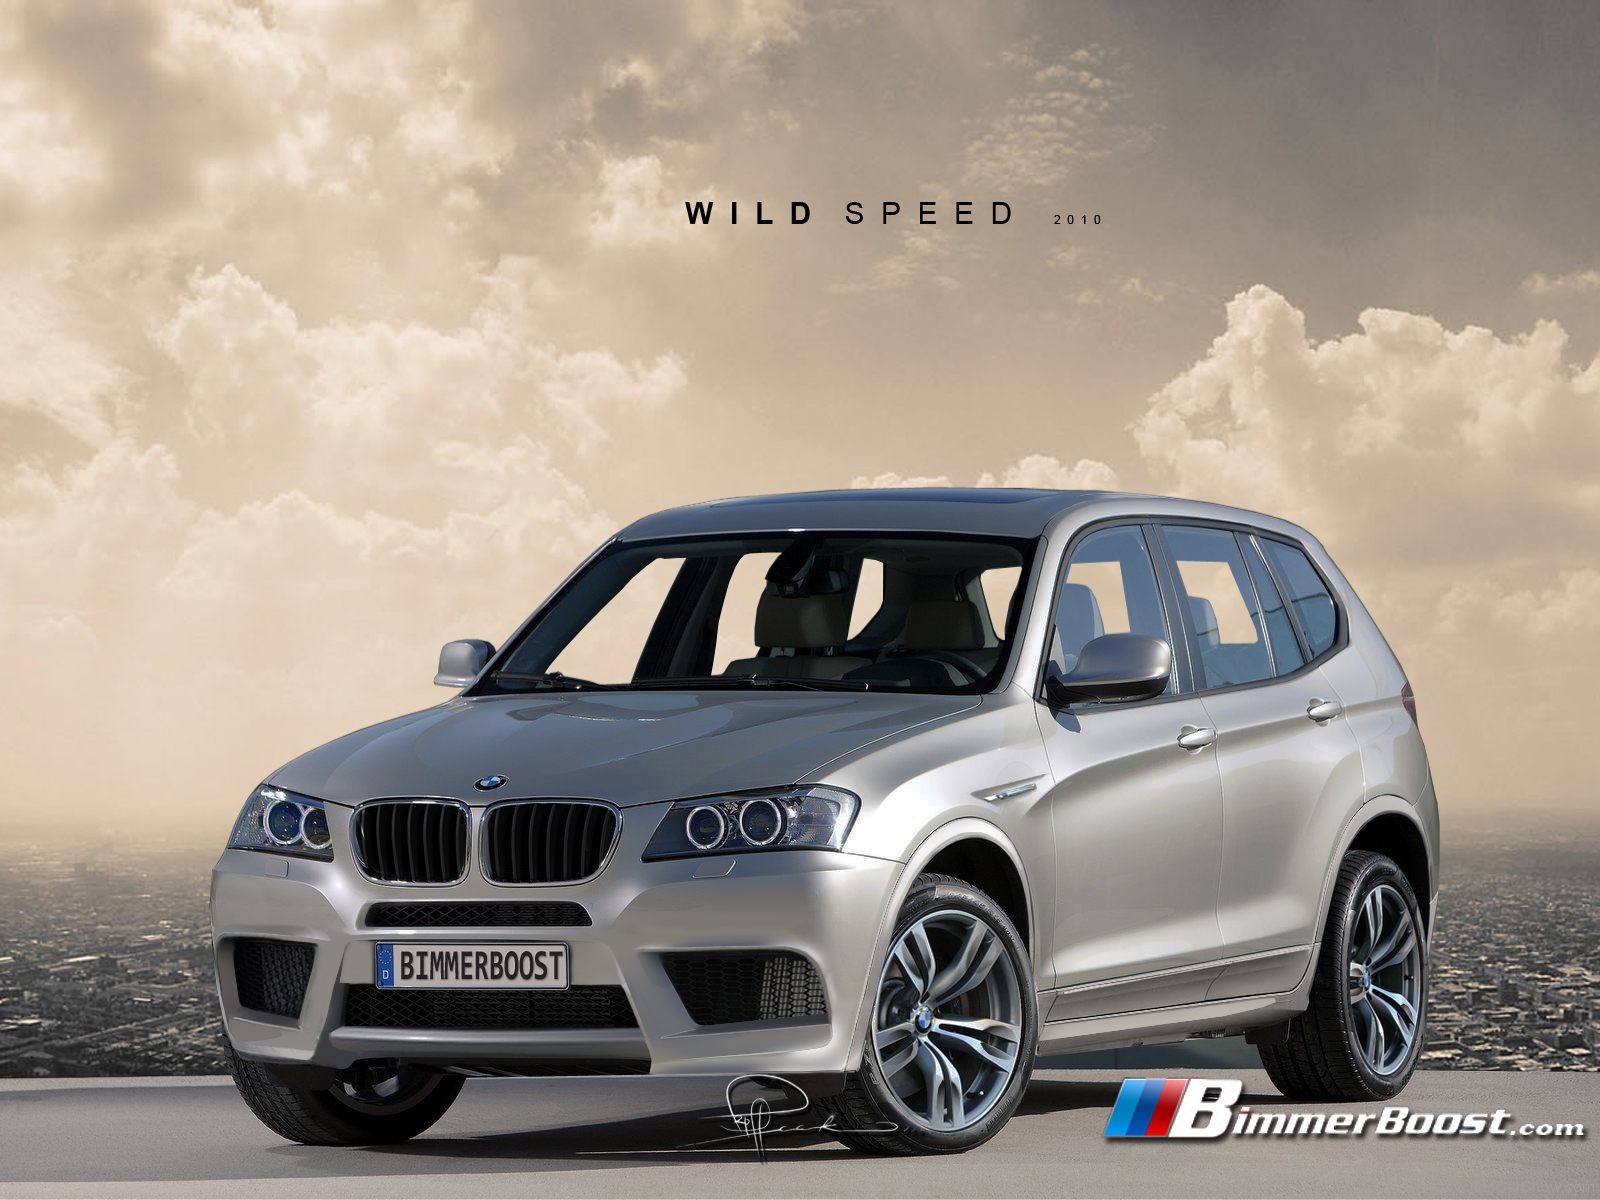 Bimmerboost rendered the M version for BMW’s X3 F25